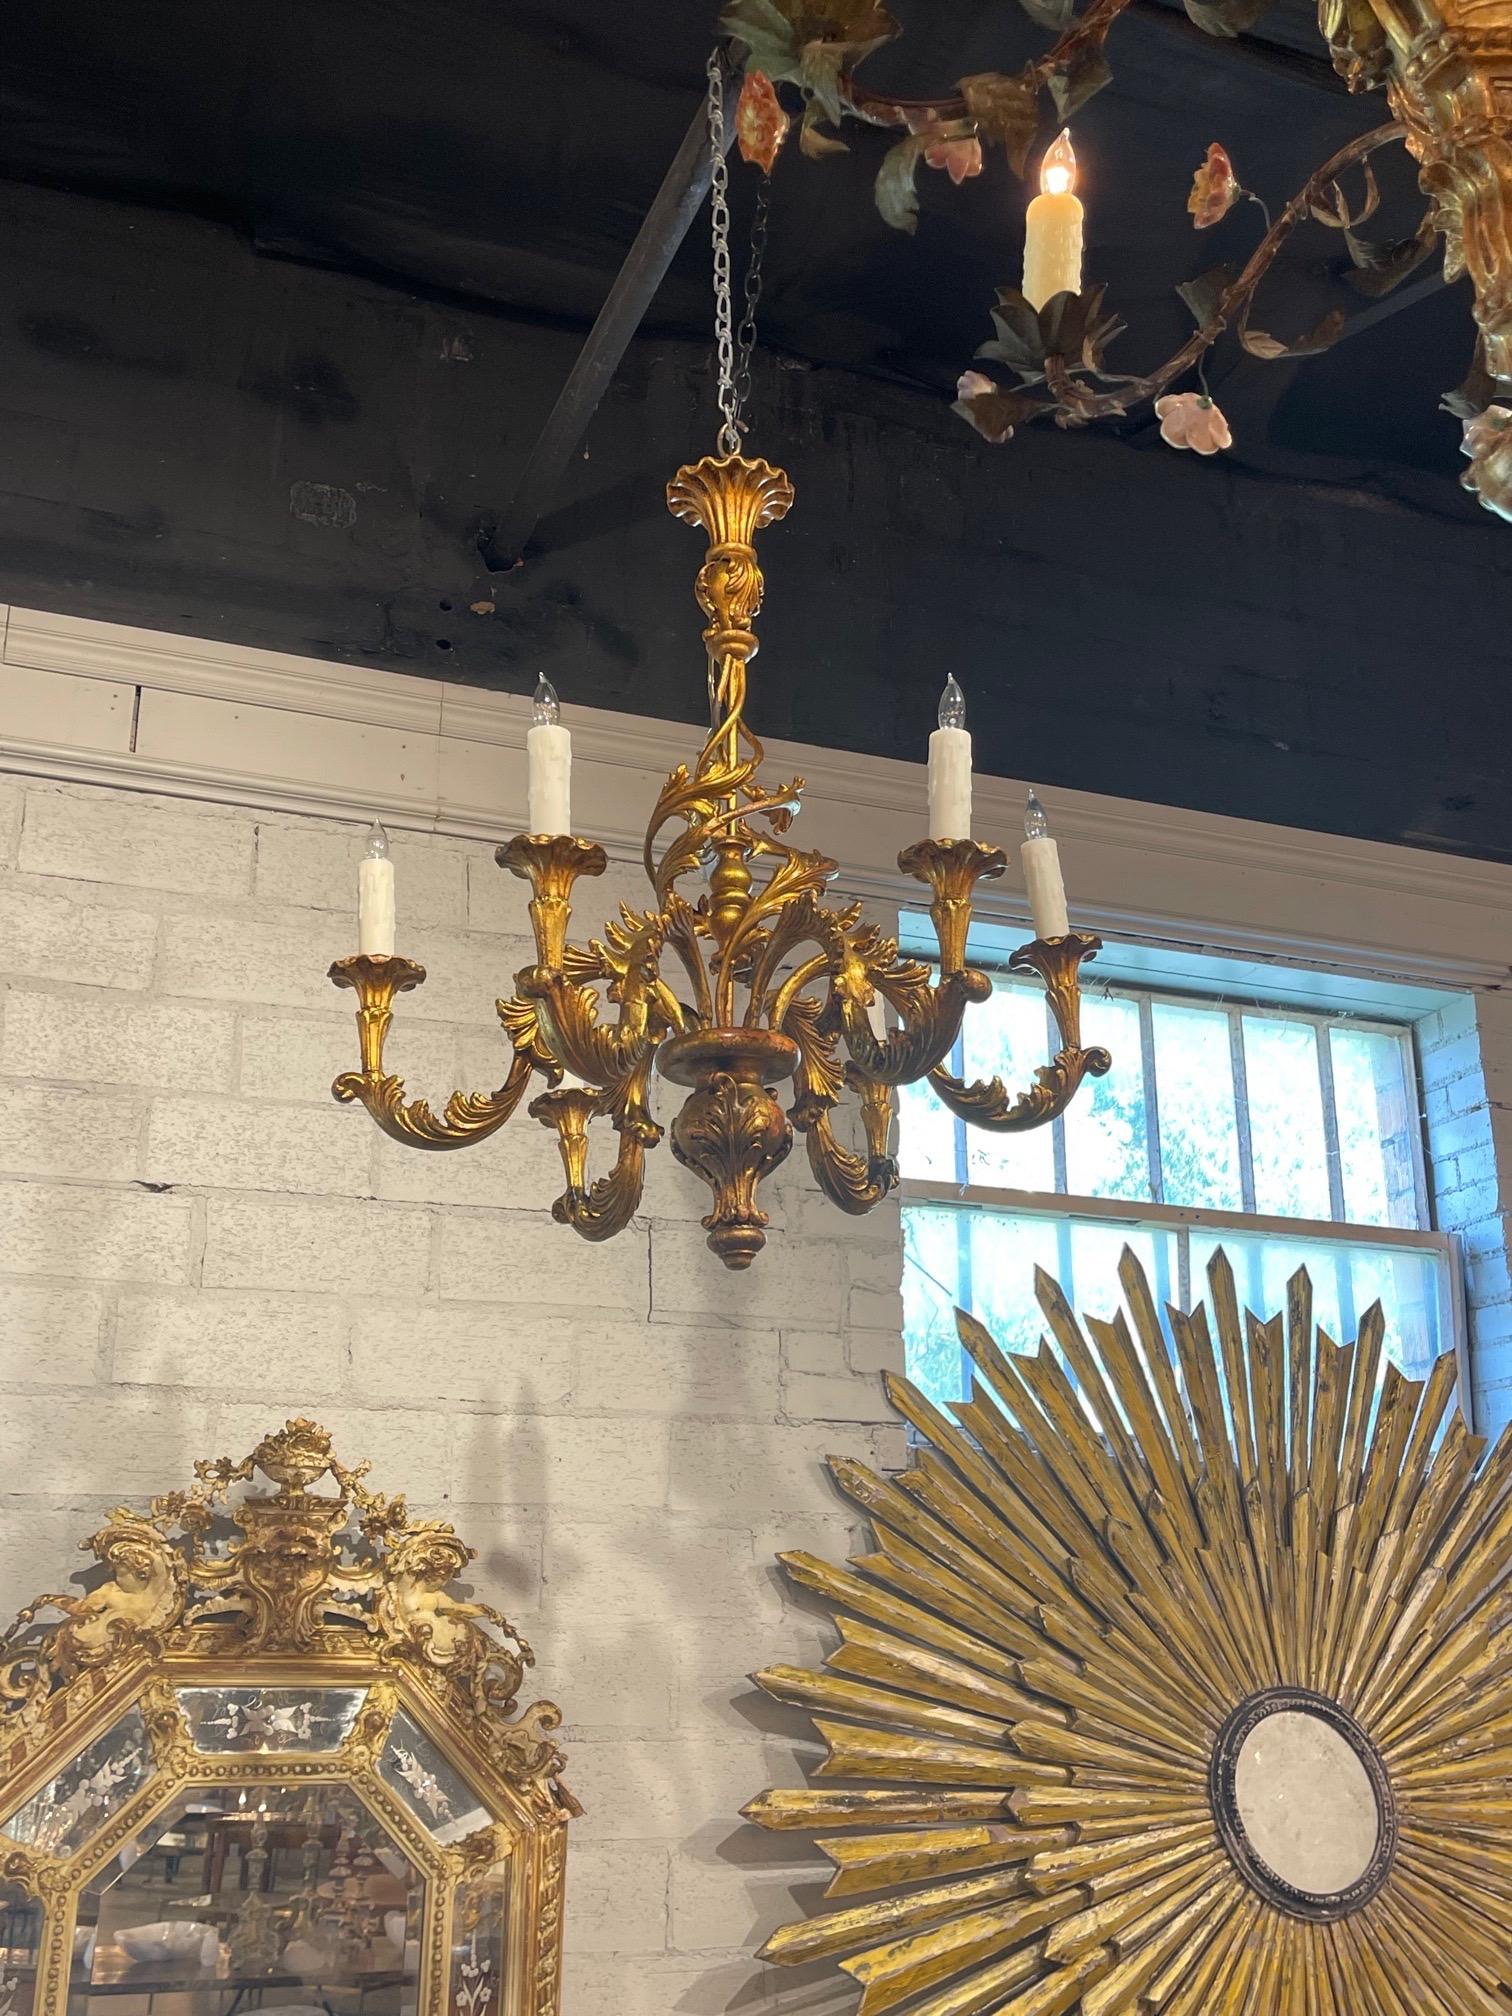 Handsome vintage Italian gilt 6 light chandelier. Beautiful decorative arms and great scale and shape. A classic look that adds a touch of elegance!! 